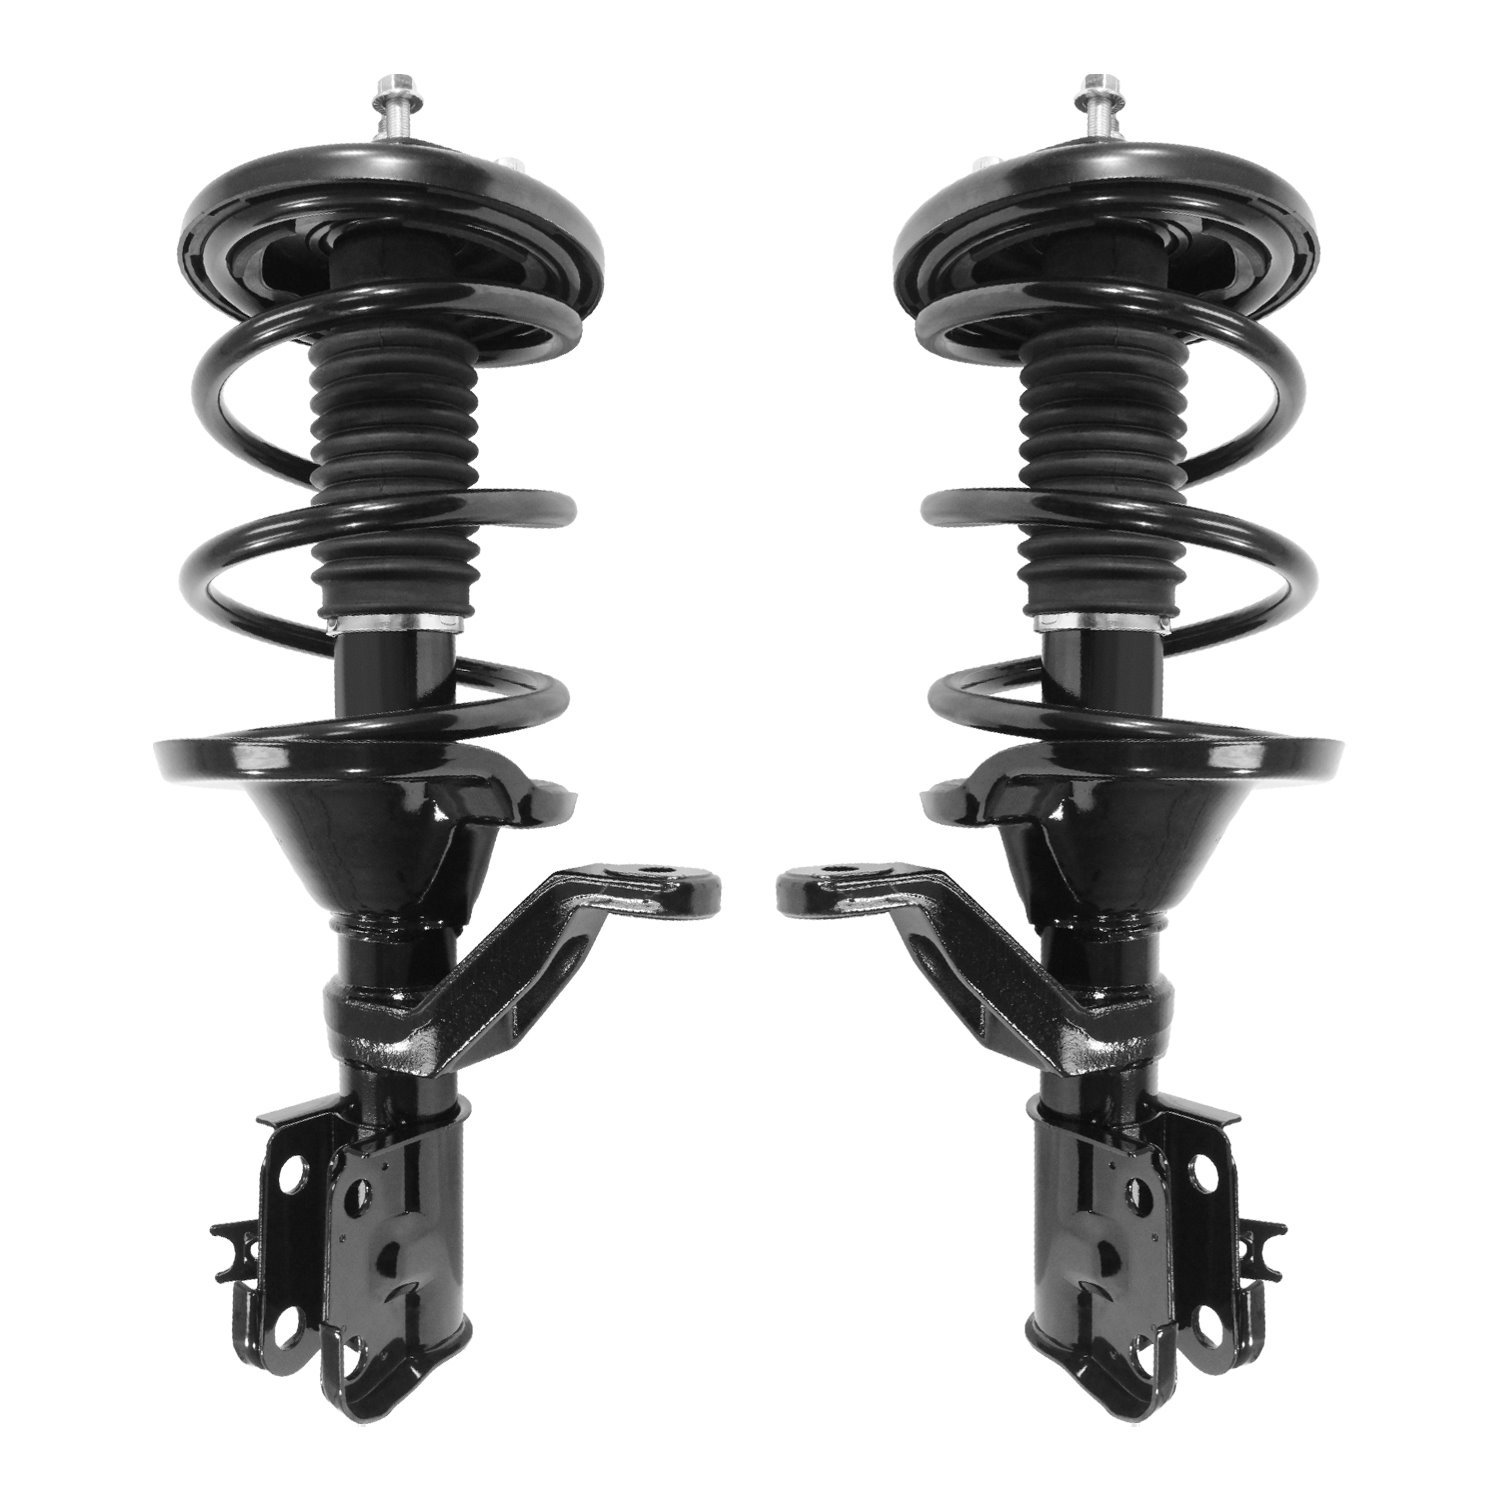 2-13051-13052-001 Suspension Strut & Coil Spring Assembly Set Fits Select Acura RSX